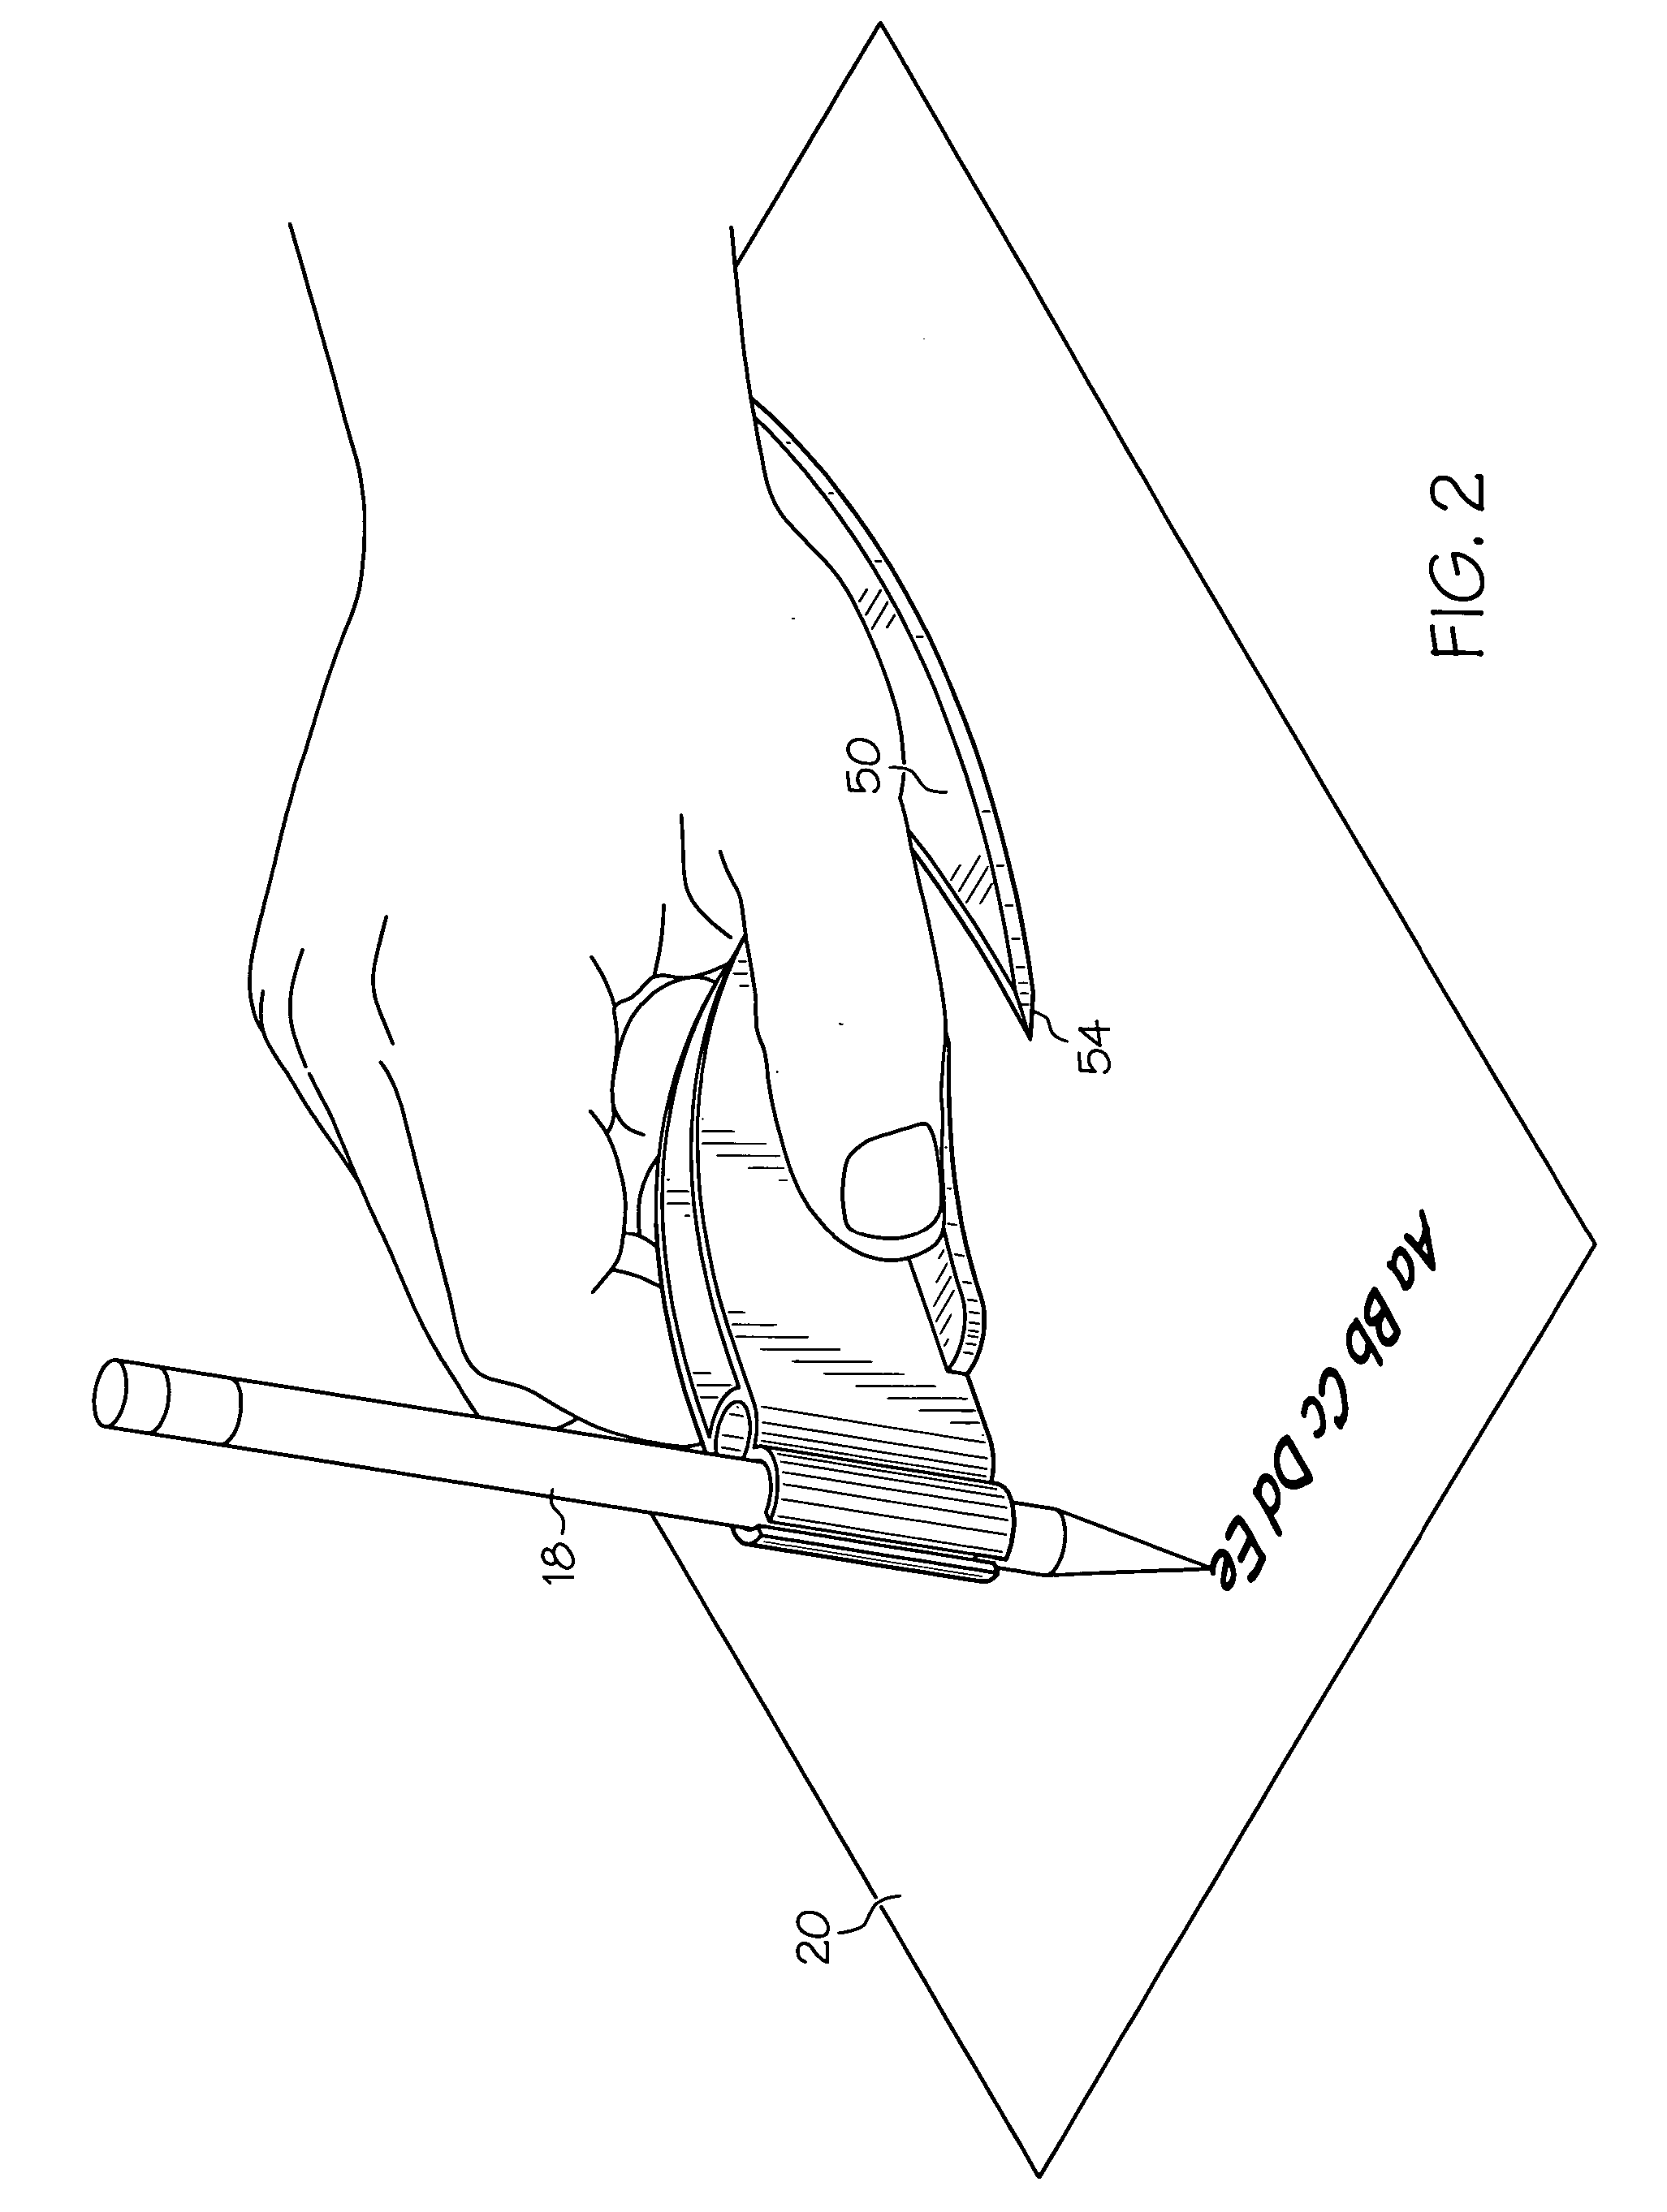 Writing instrument holder and hand support